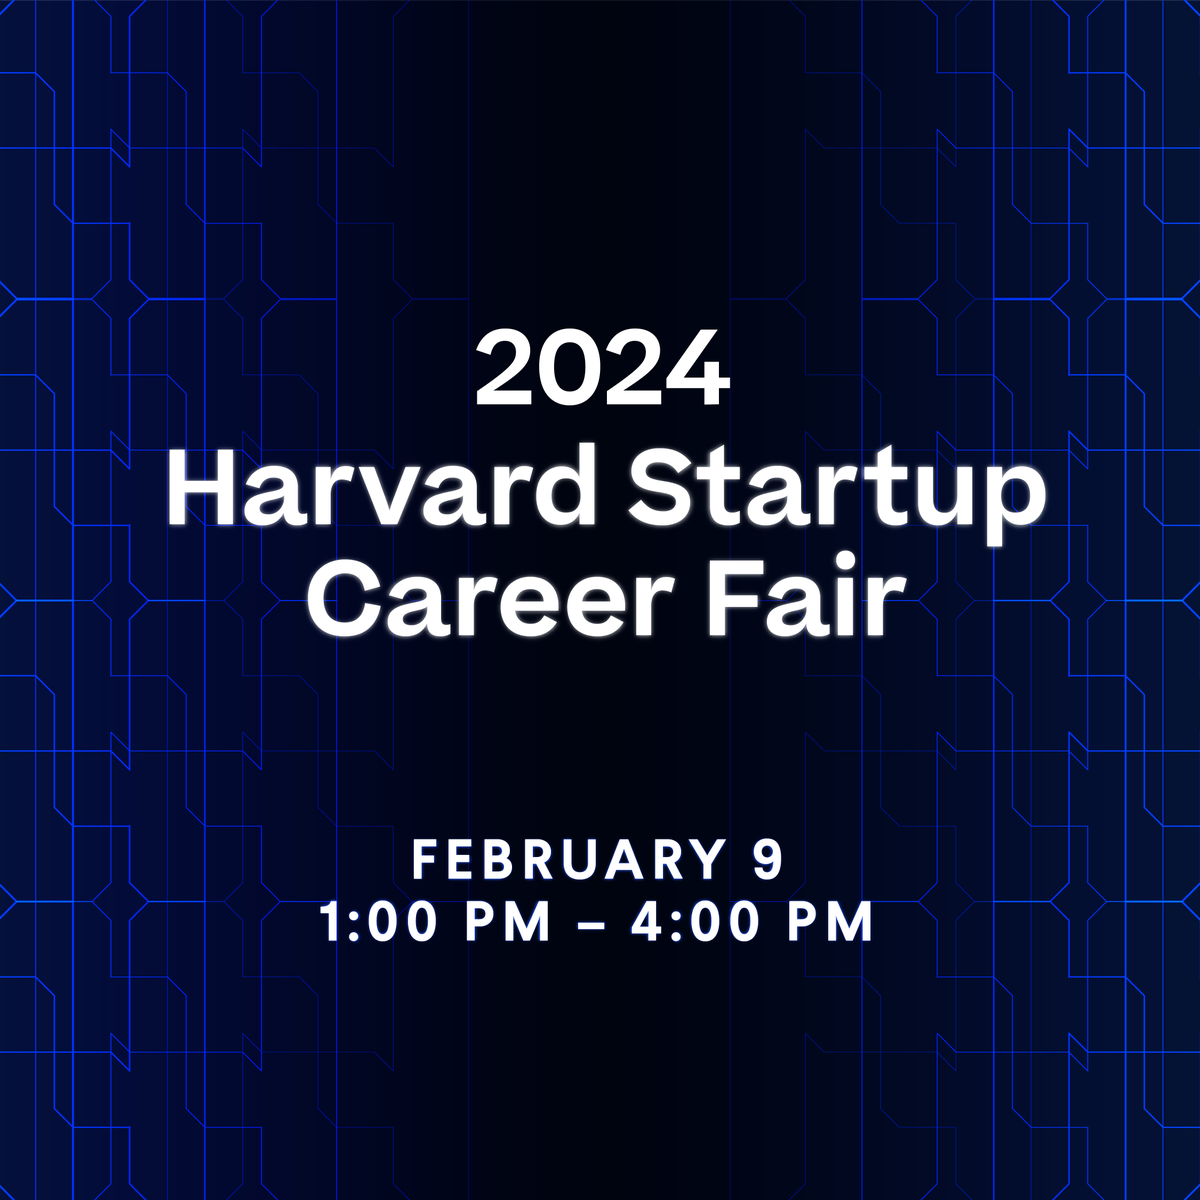 Harvard University-founded startups: register to table at the 2024 Harvard Startup Career fair in February! It's an excellent chance to attract diverse new talent for internships and full-time opportunities (and we're hosting it here at the i-lab). bit.ly/3RNYwdj